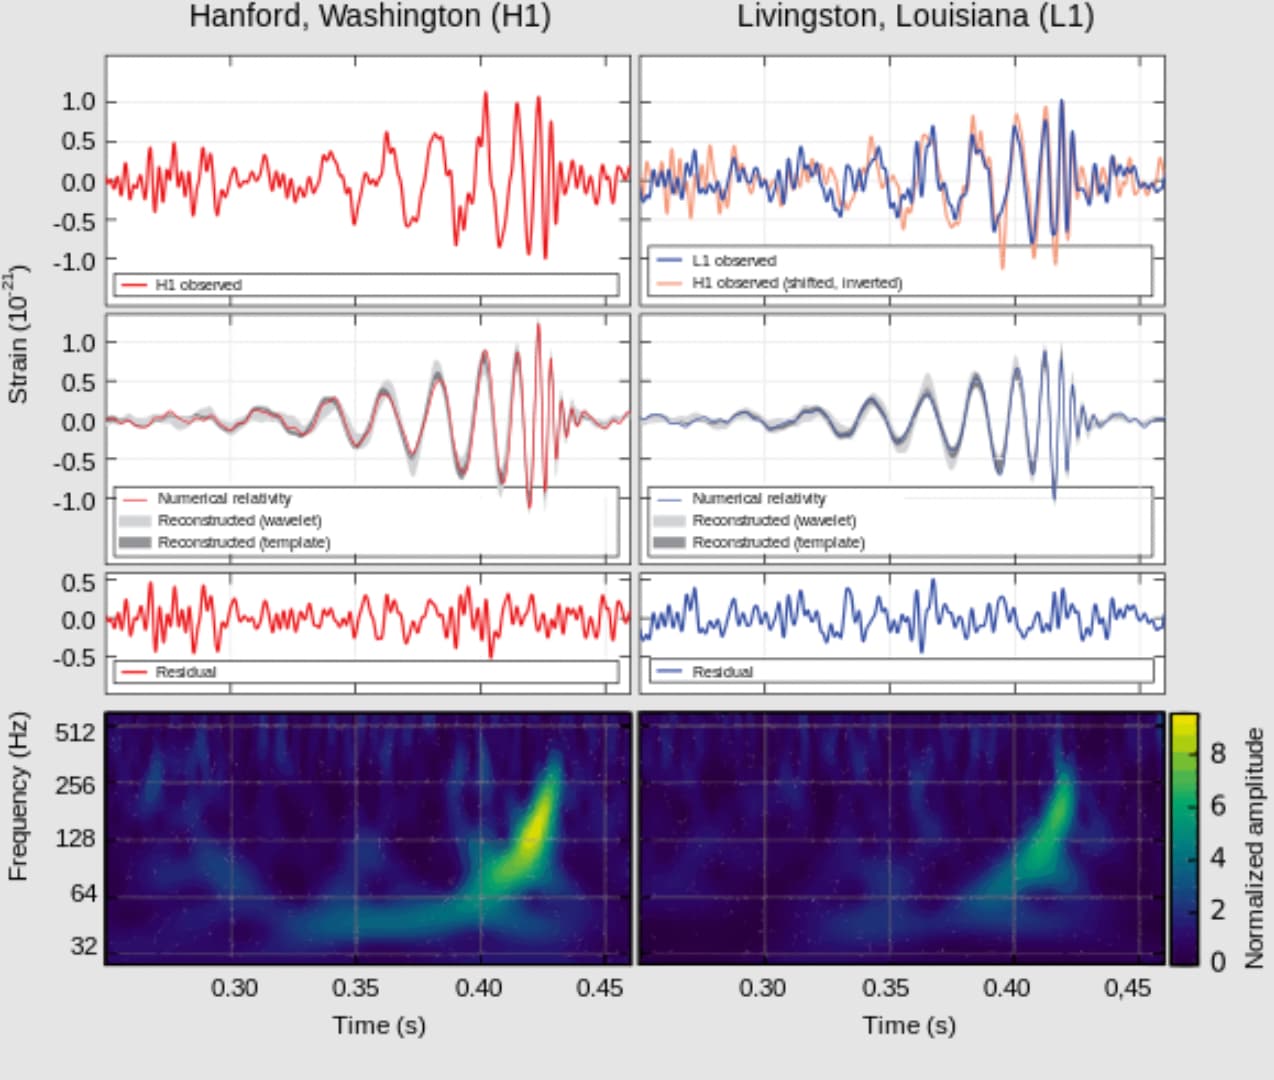 gravitational wave data - Frequency Hz Strain 1021 1.0 0.5 0.0 0.5 1.0 H1 observed Hanford, Washington H1 Livingston, Louisiana L1 L1 observed H1 observed shifted, Inverted 1.0 0.5 0.0 0.5 1.0 Numerical relativity 0.5 F wwwwwwwww Reconstructed wavelet Rec